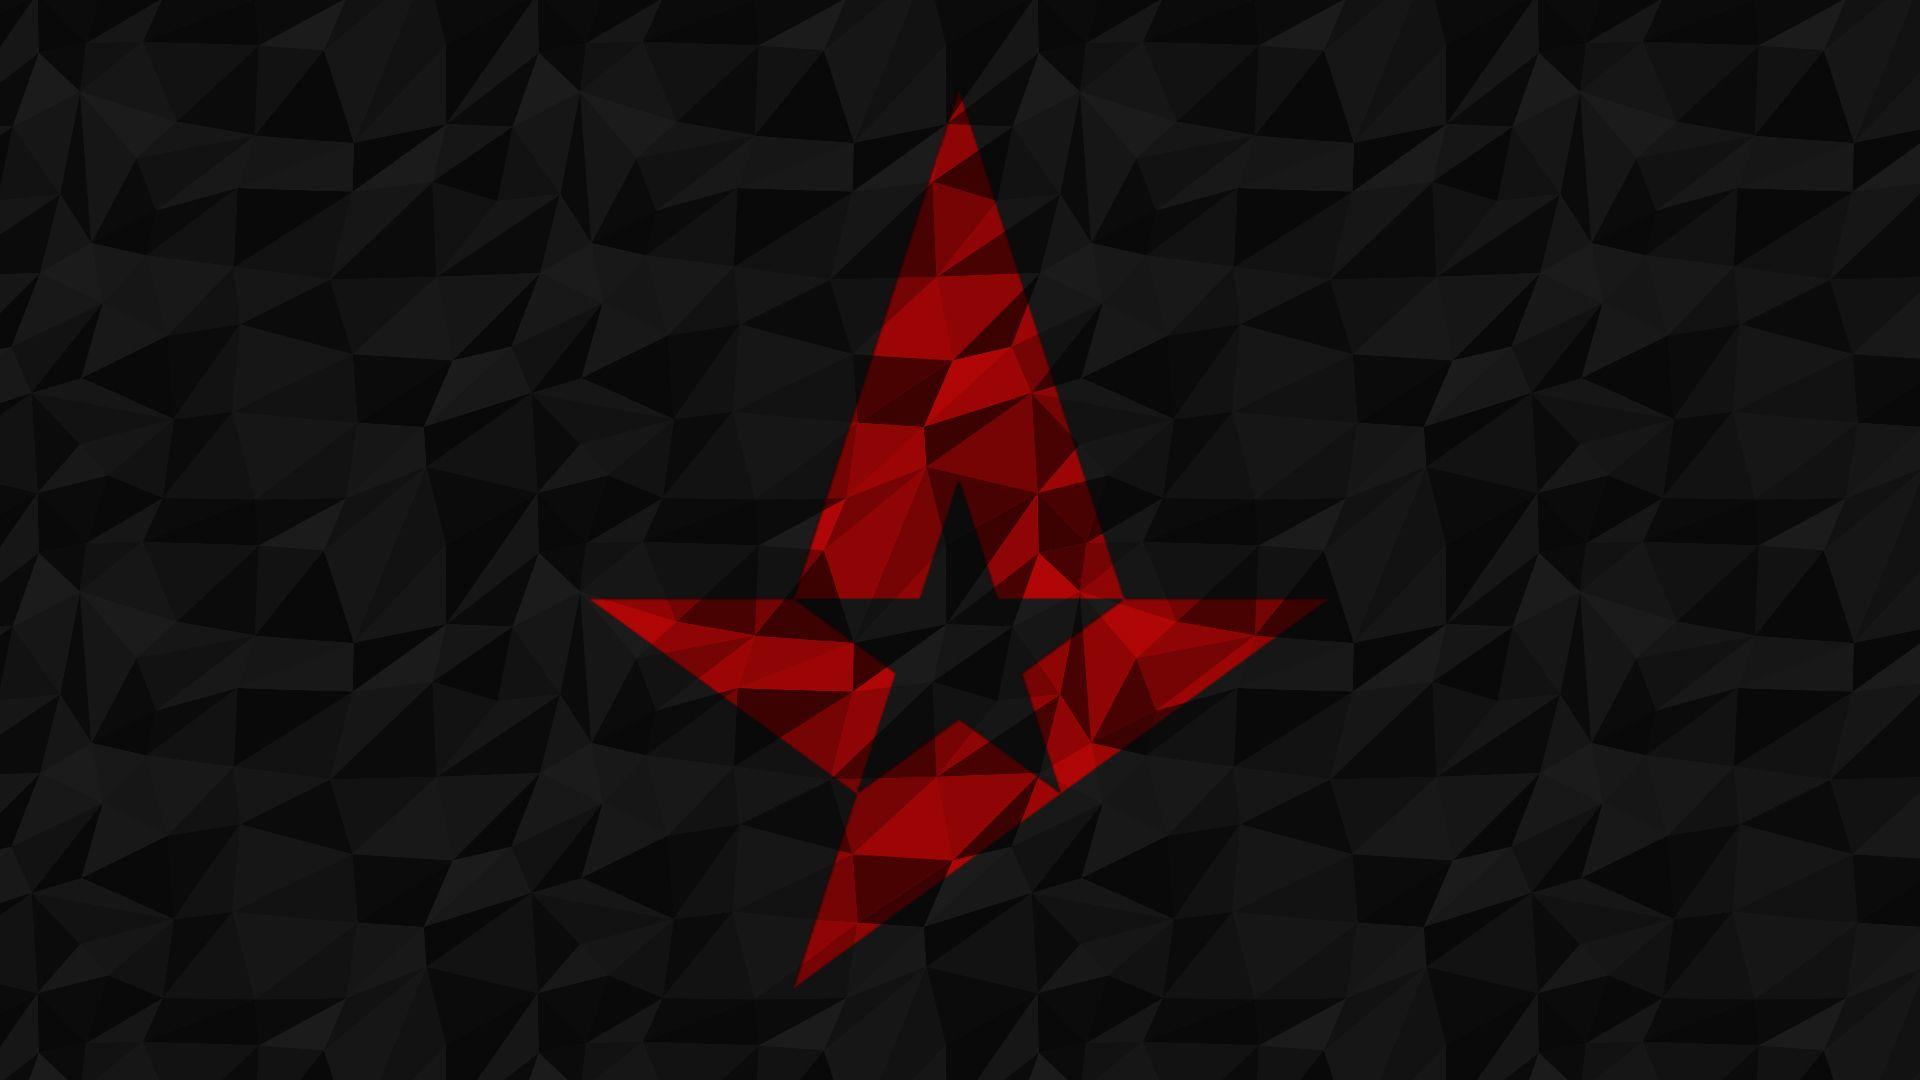 Astralis Polygon. CS:GO Wallpaper and Background